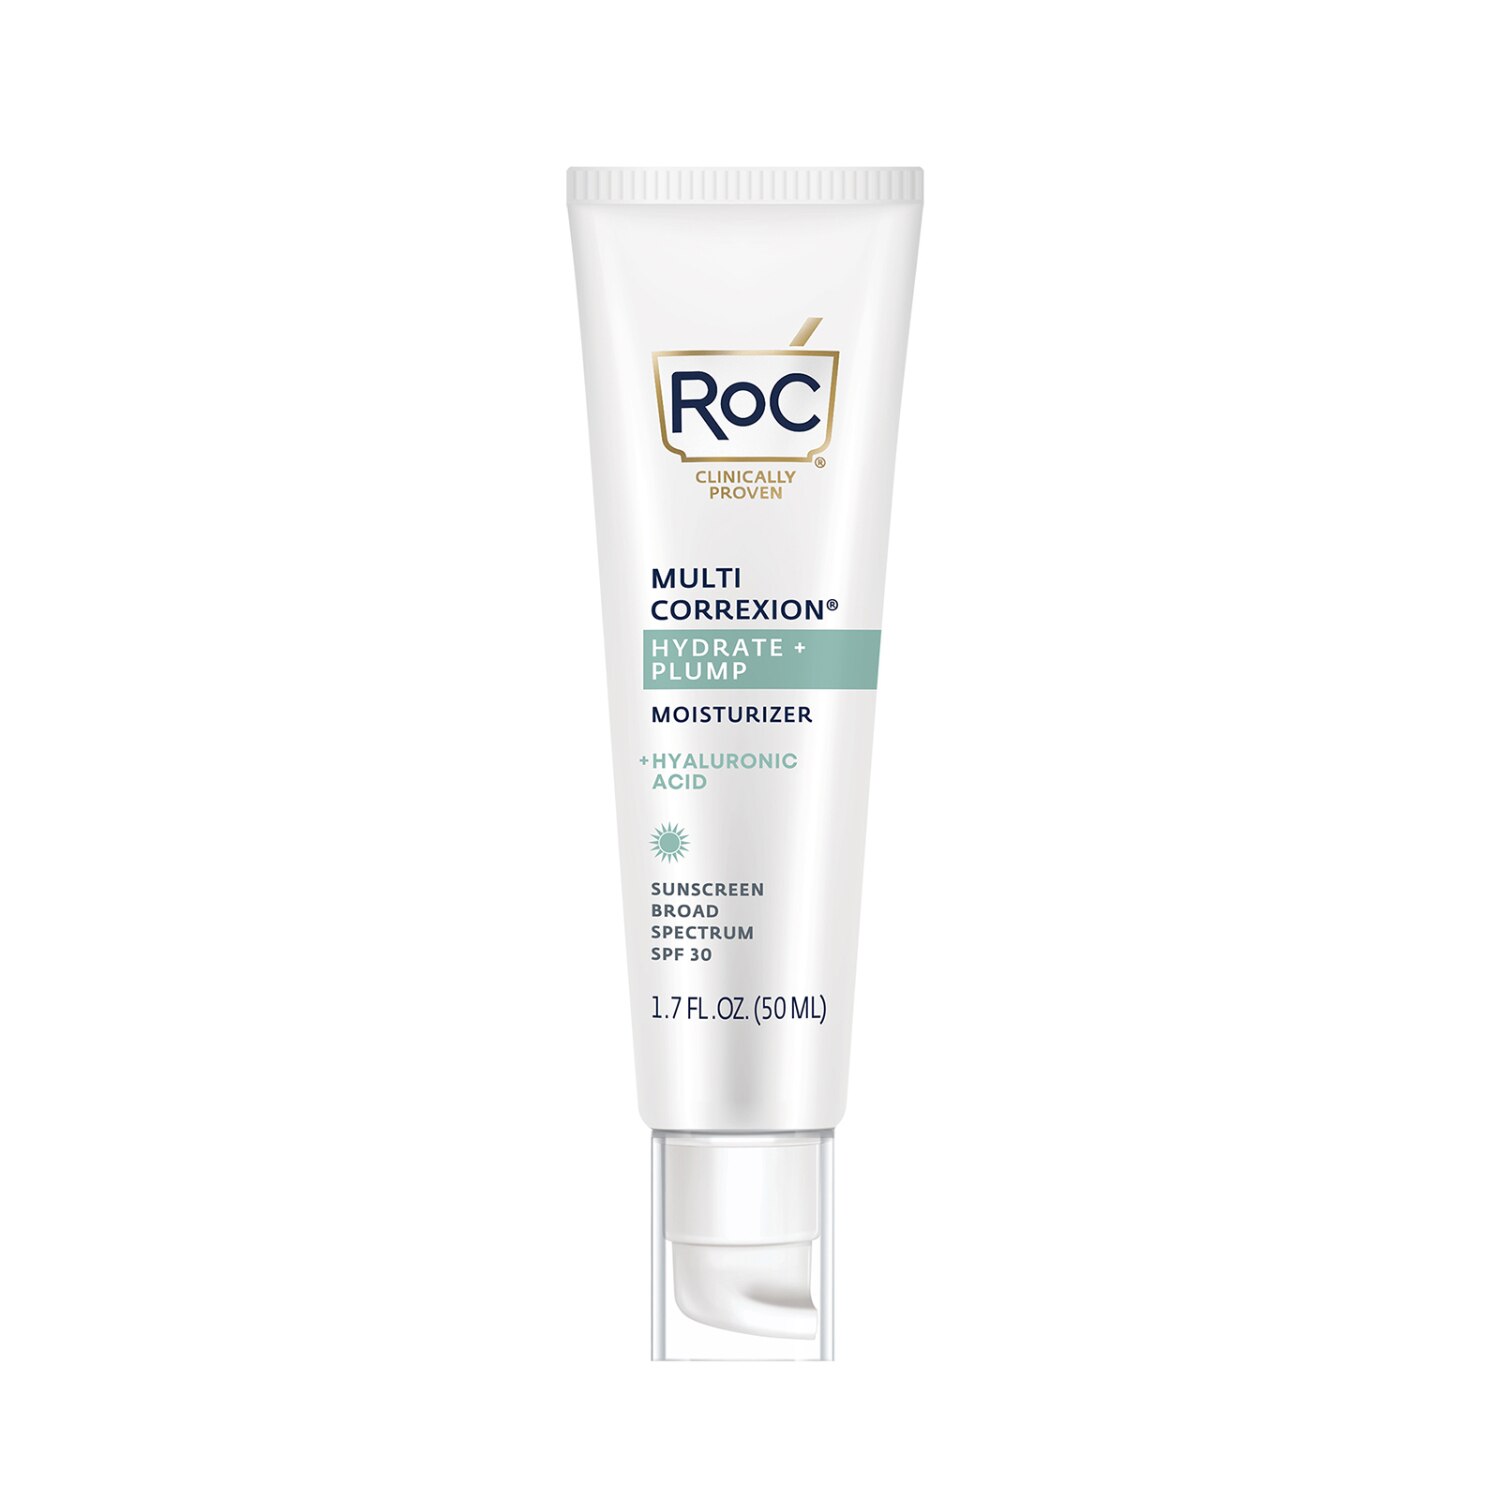 RoC Multi Correxion Hydrate + Plump SPF 30 Daily Moisturizer with Hyaluronic Acid, 1.7 OZ